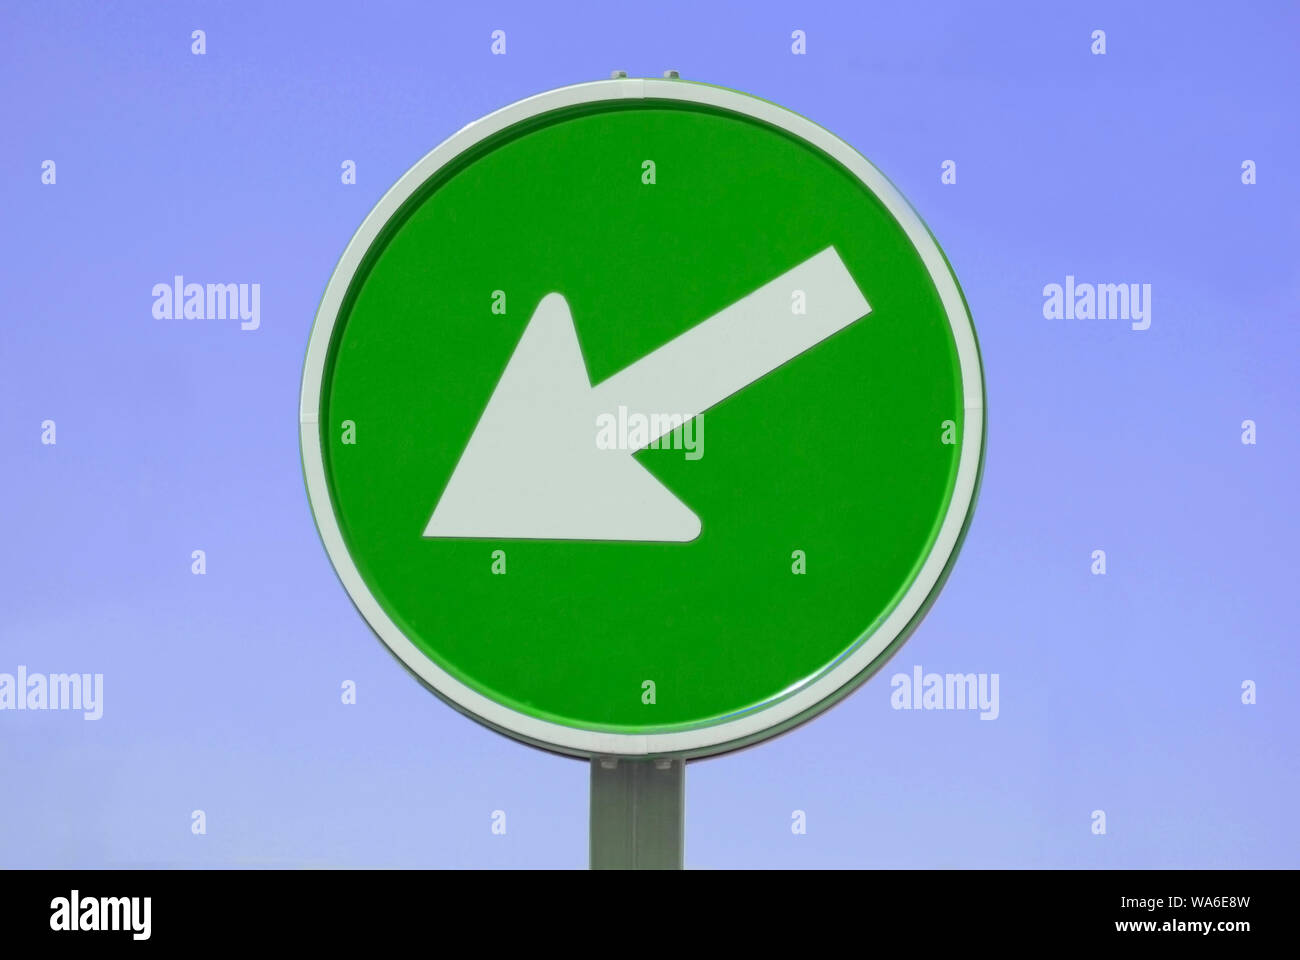 traffic sign synonym for green politics Stock Photo